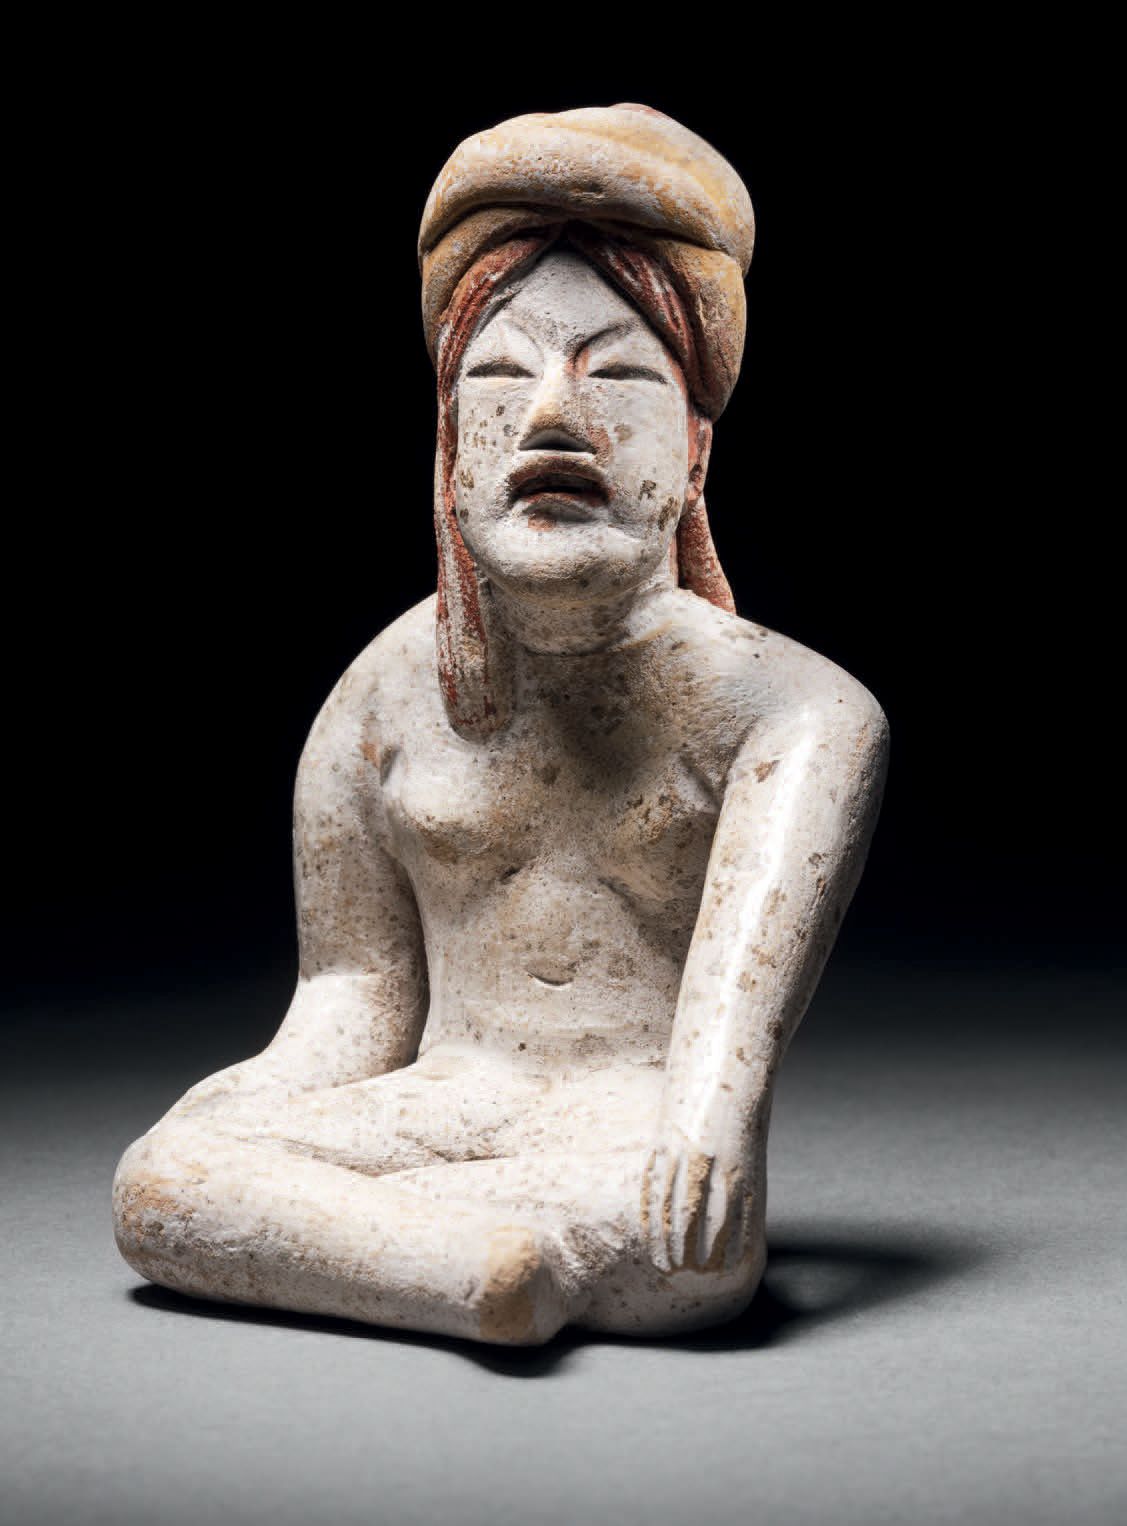 Null SEATED FIGURE WITH TURBAN Tlatilco culture, Valle de Mexico, Mexico
Middle &hellip;